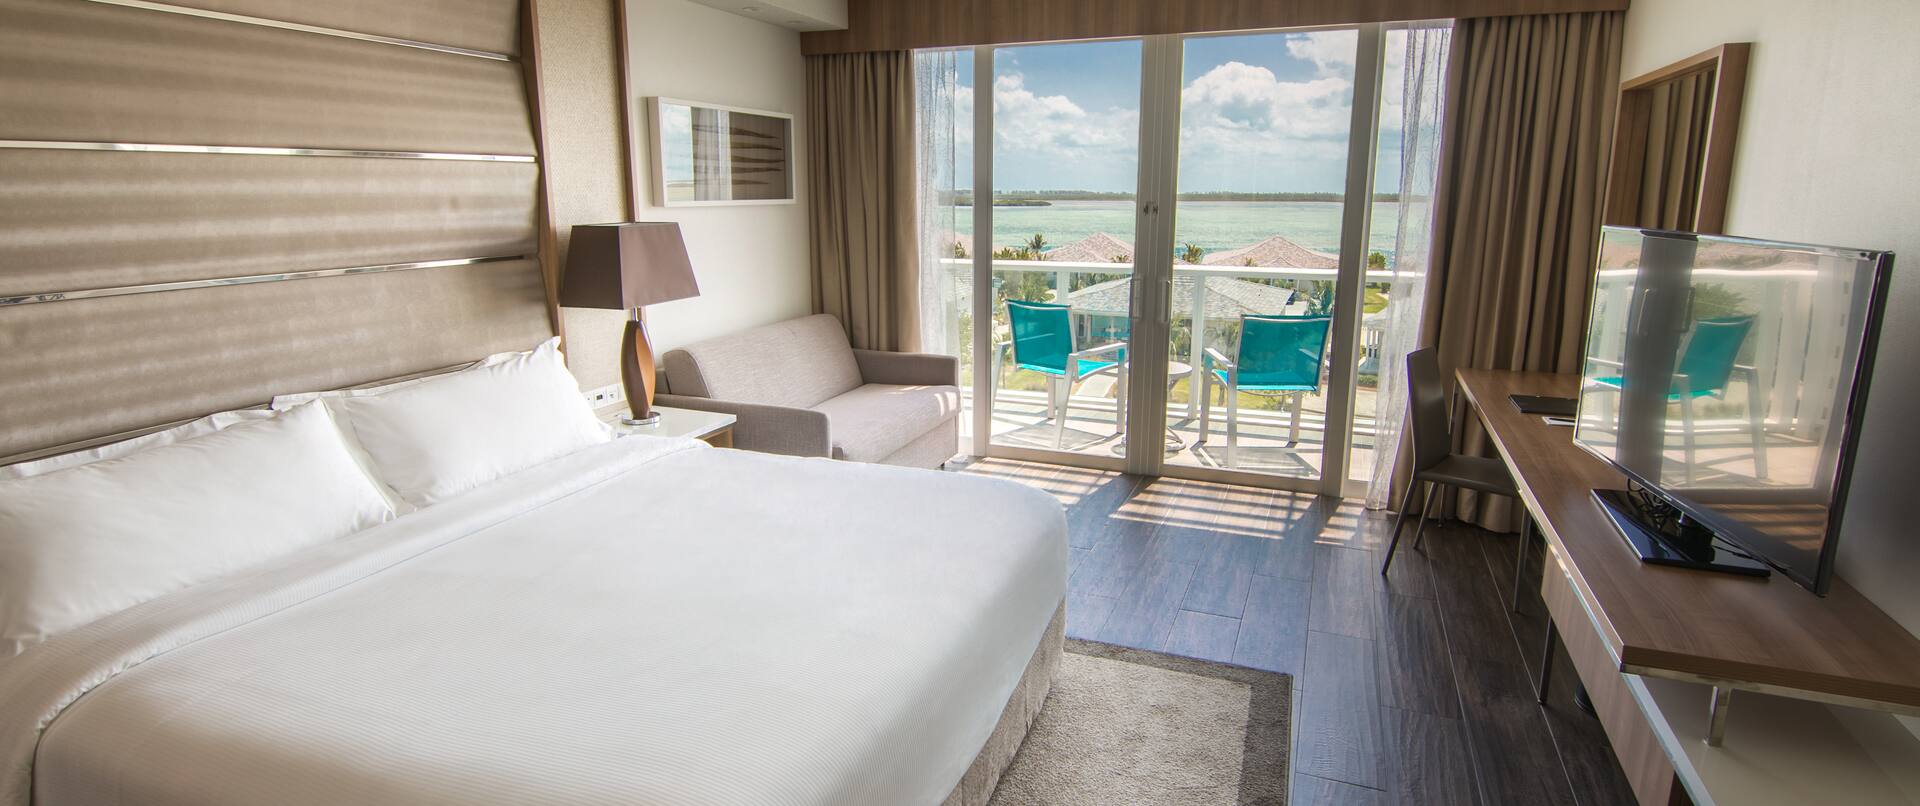 King Bed Room with Lagoon View